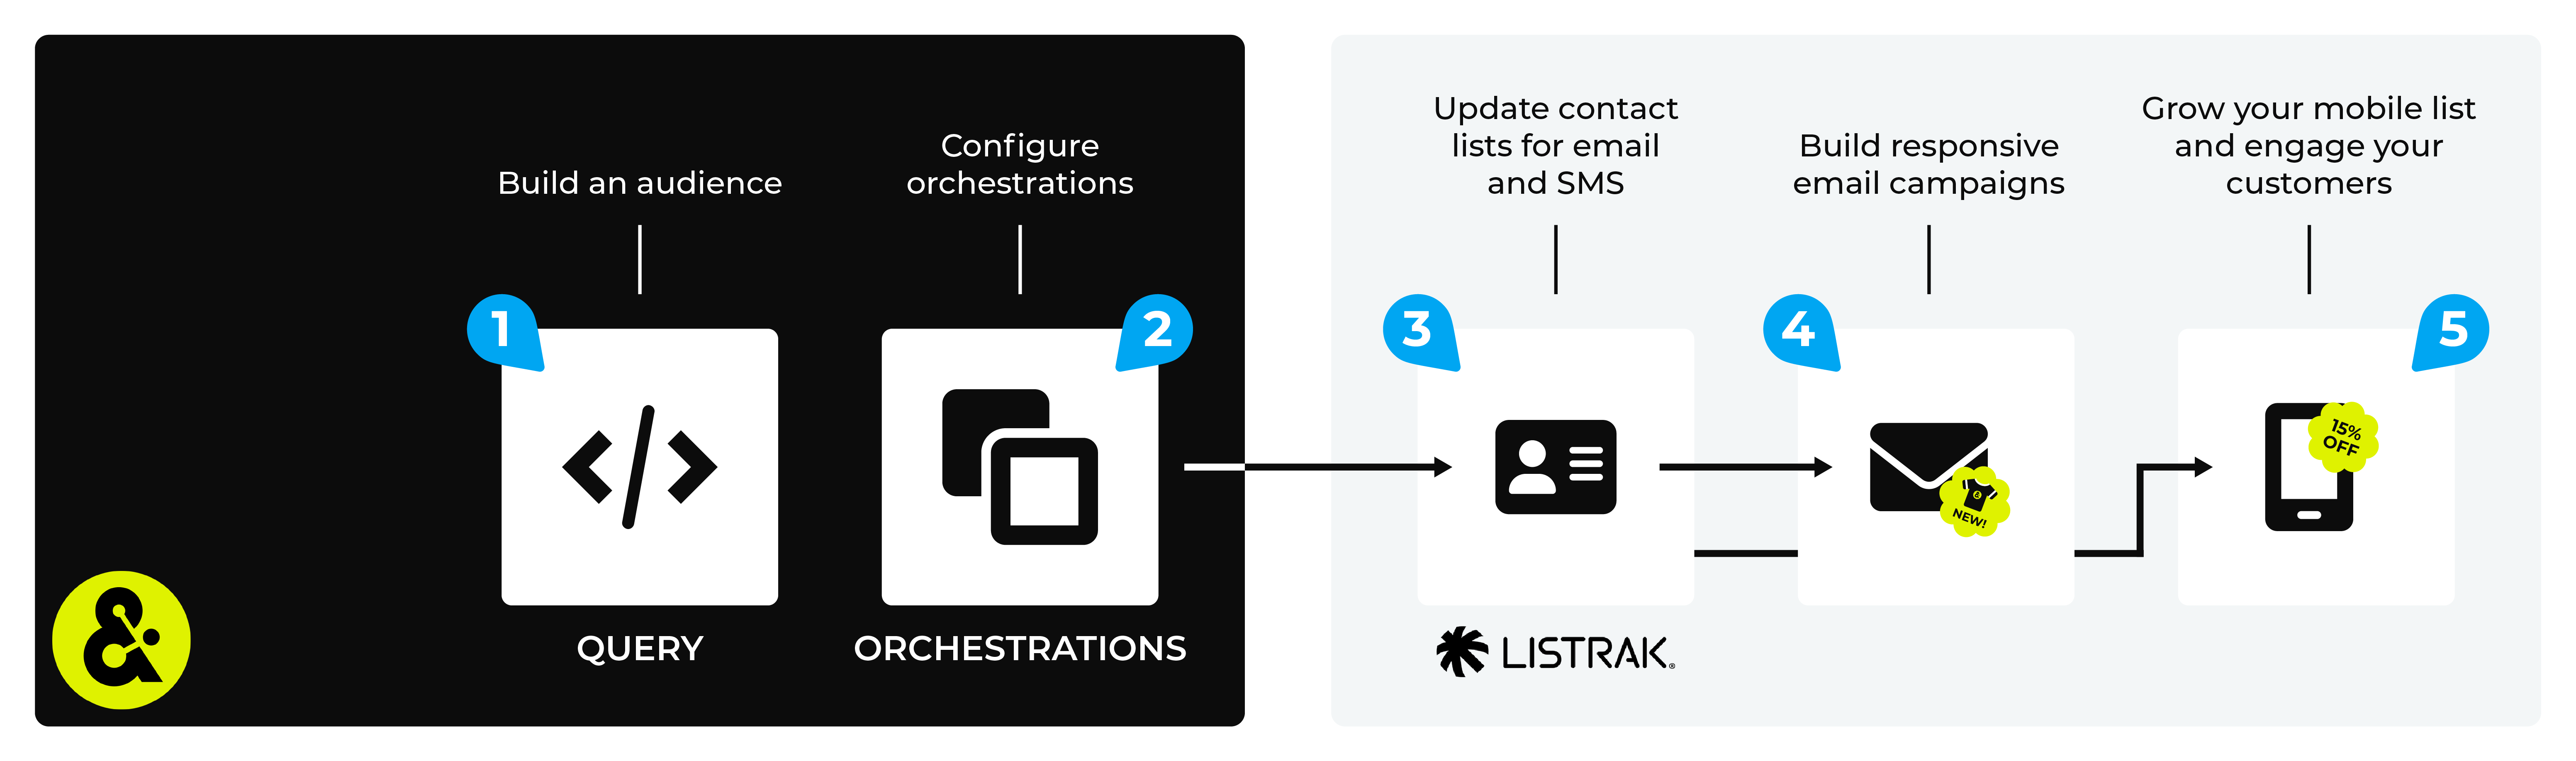 Send email and SMS lists to Listrak.